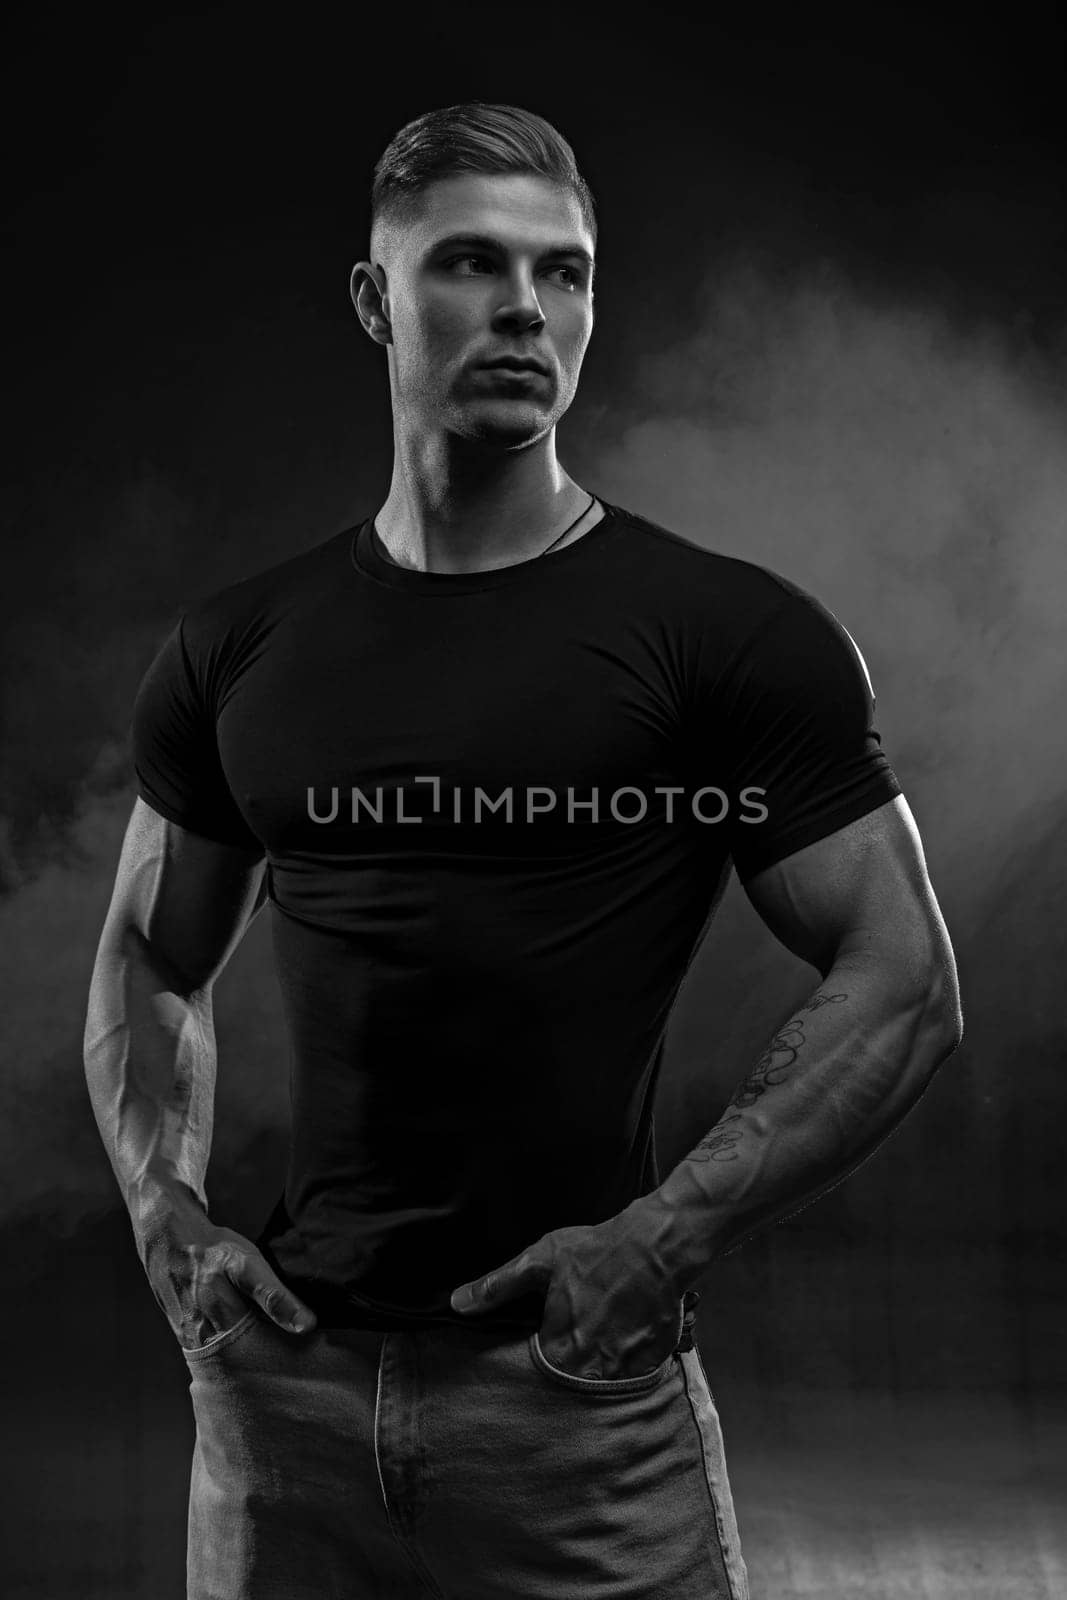 Muscular model sports young man in jeans and black t-shirt on black background. Fashion portrait of brutal sporty healthy strong muscle guy with a modern trendy hairstyle. Black and white photo